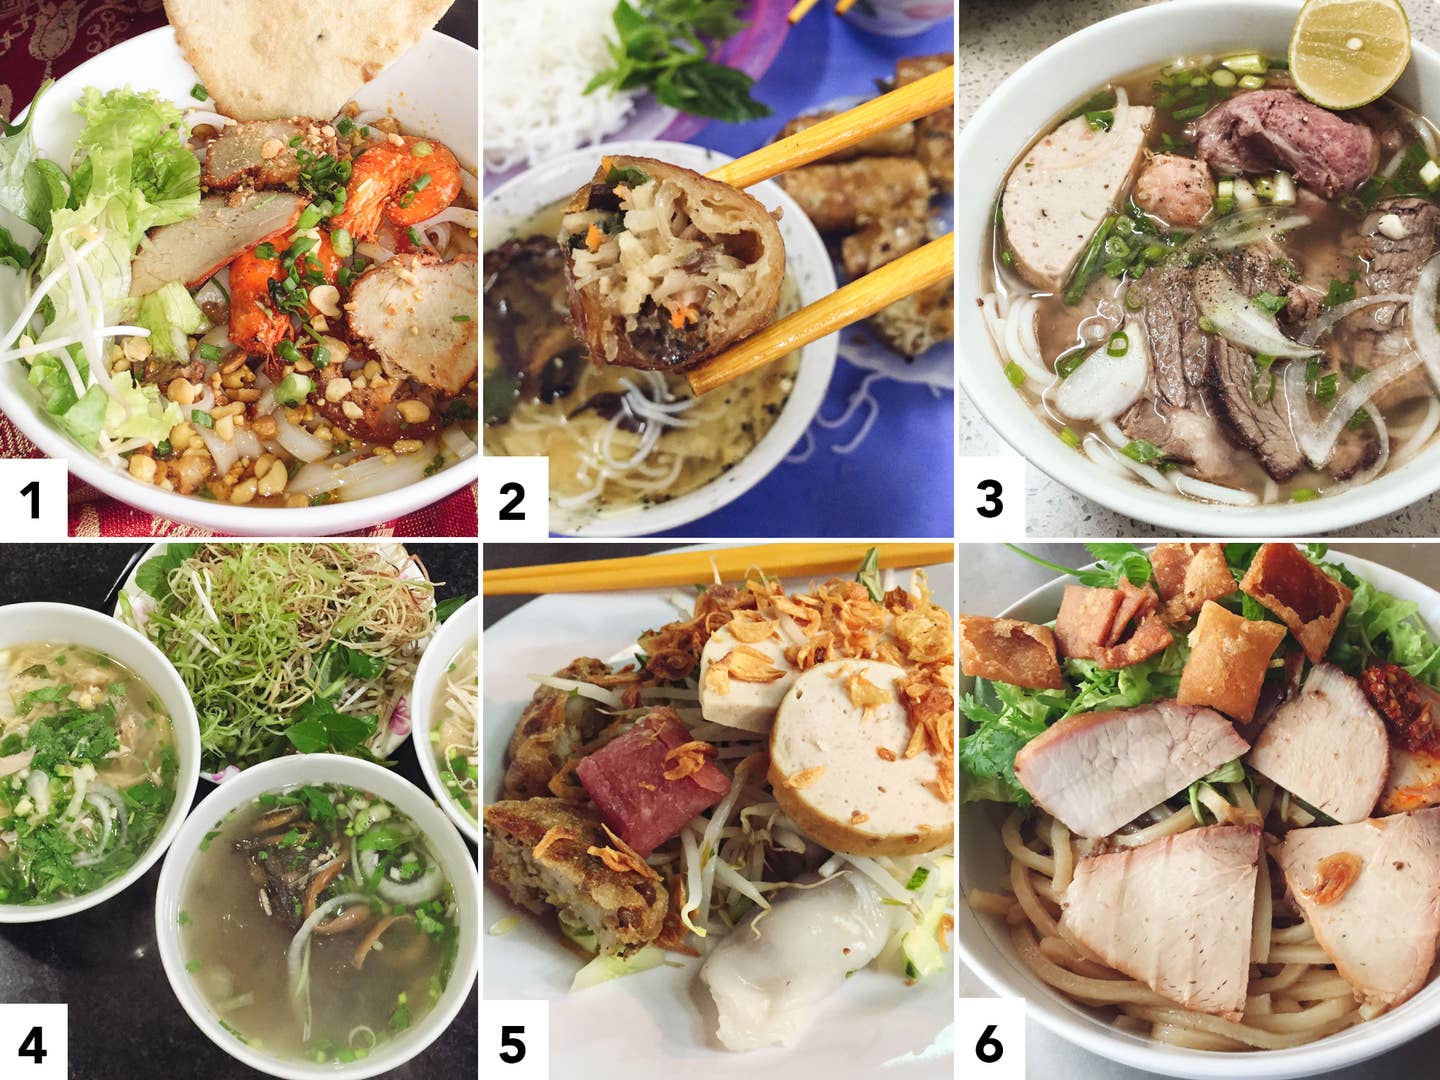 10 Noodle Dishes Not to Miss in Vietnam